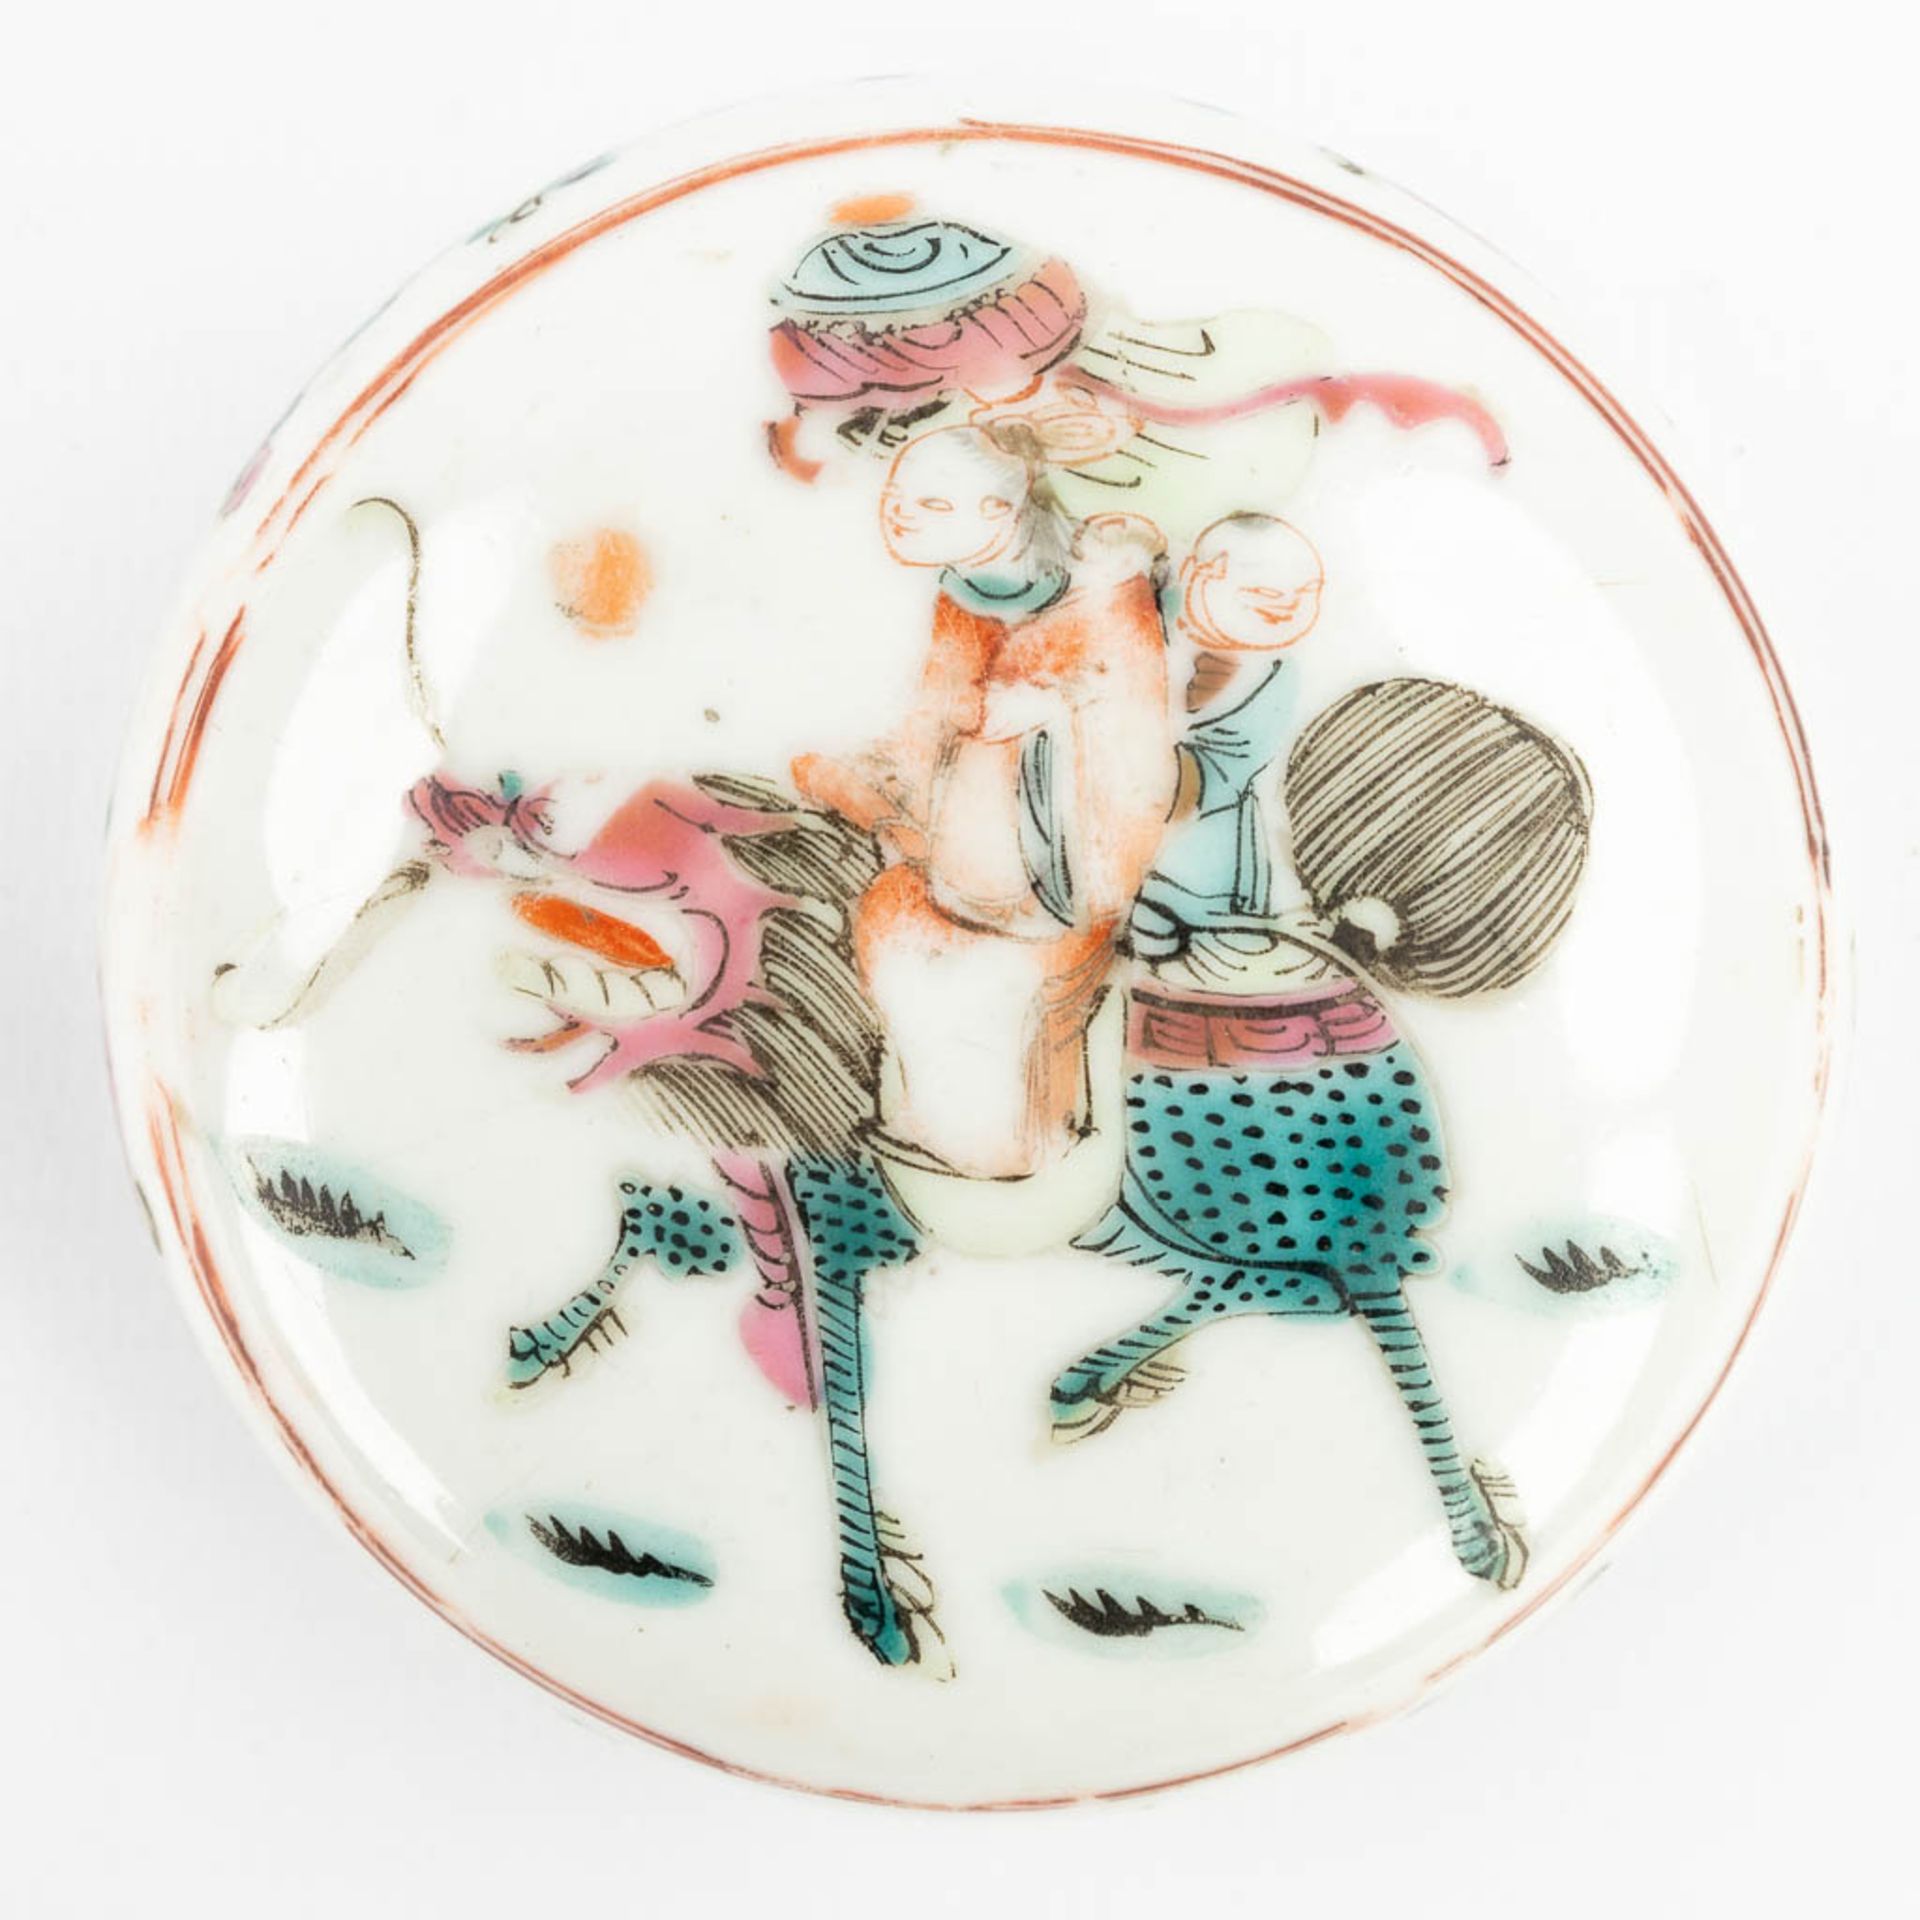 AÊset of 2 Chinese pots with lid, with hand-painted decor and made of porcelain (5 x 8,5 cm) - Image 15 of 18